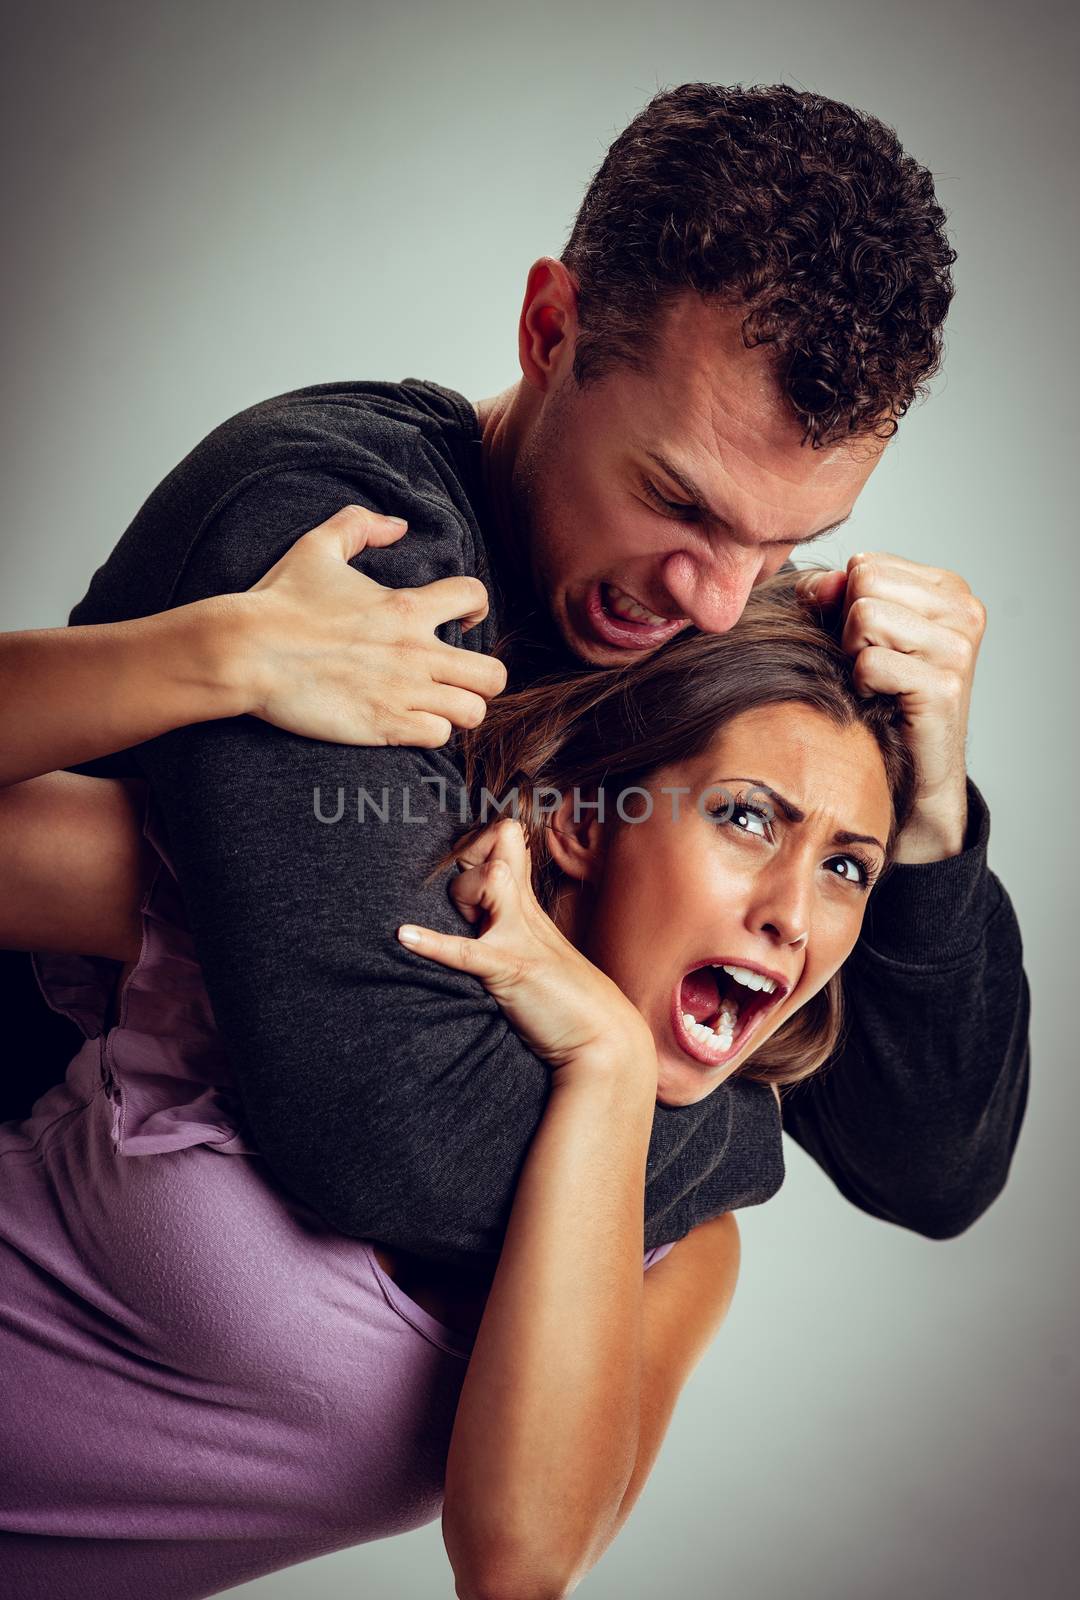 Angry aggressive husband trying to hit and choking his wife.